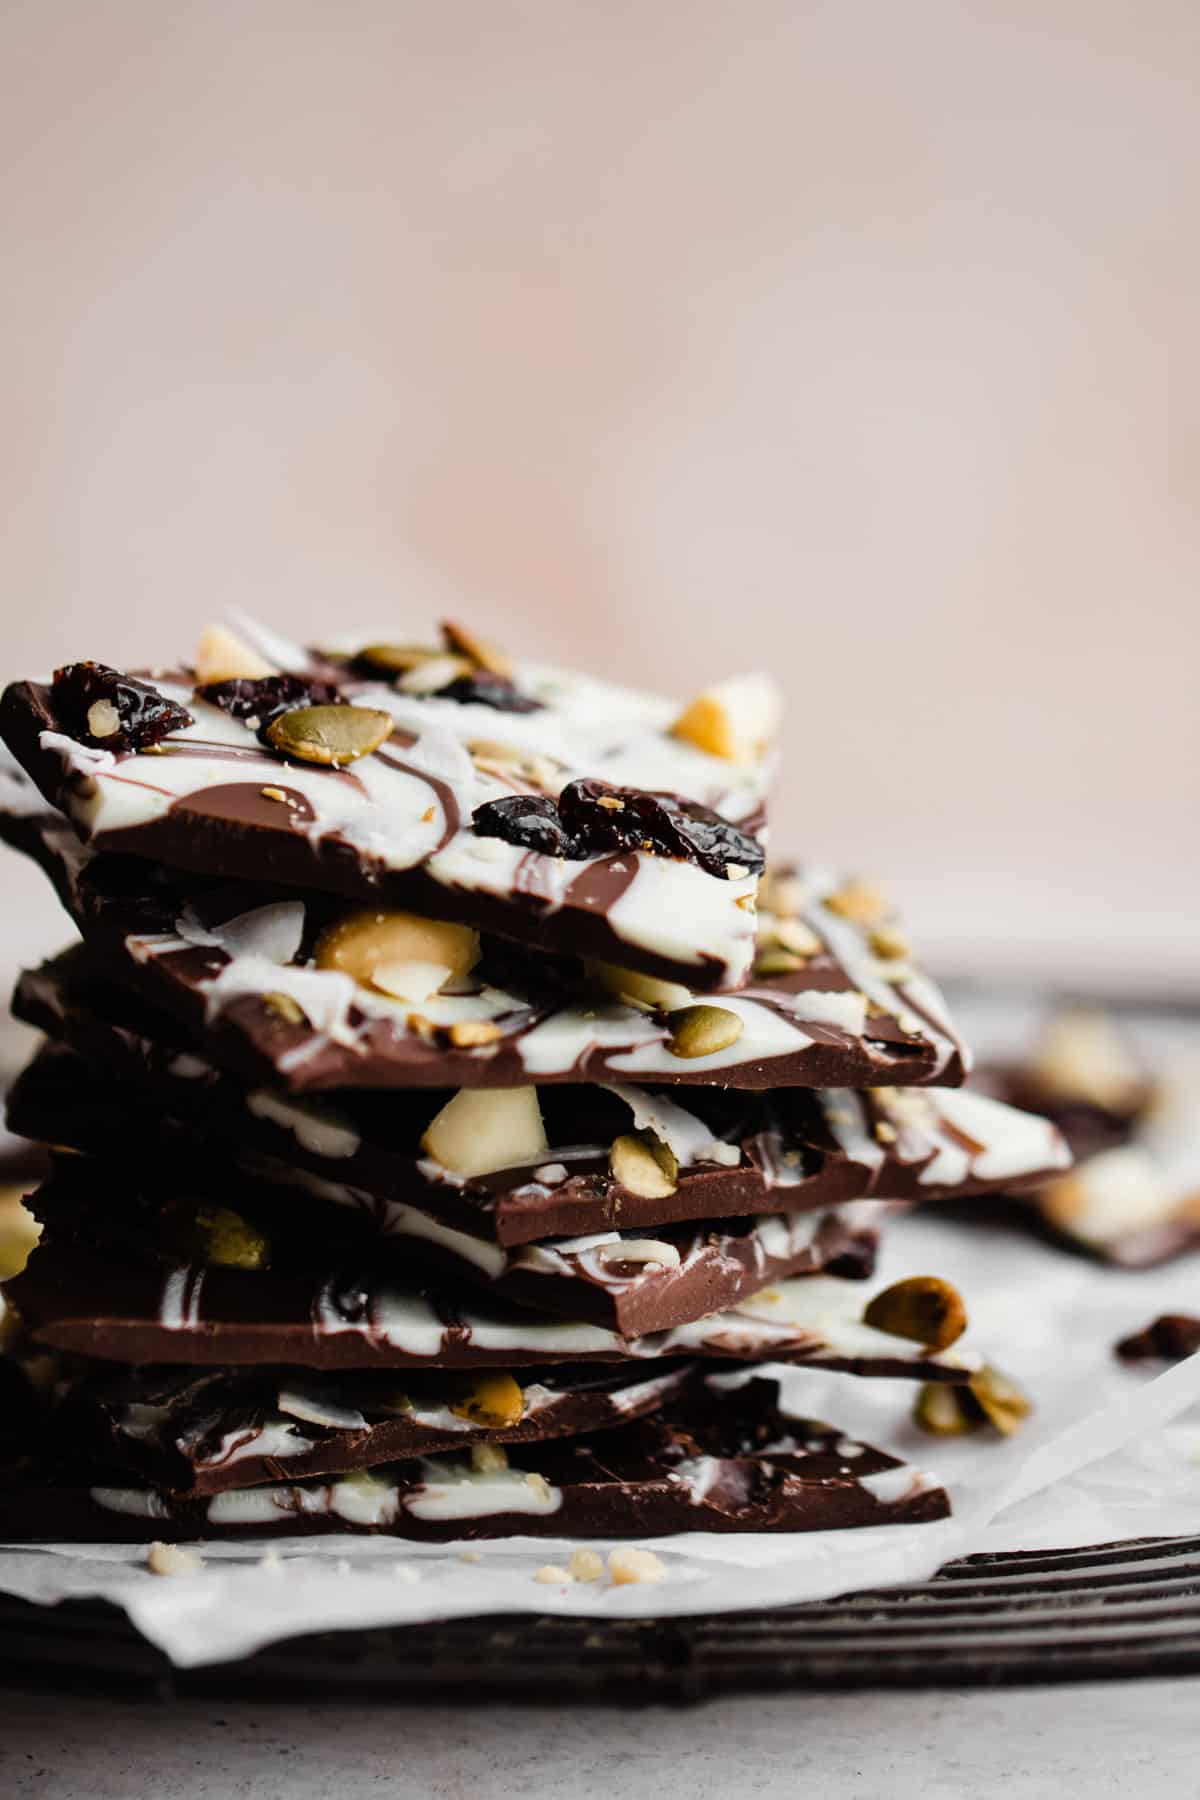 A close-up on a stack of the homemade chocolate bark.